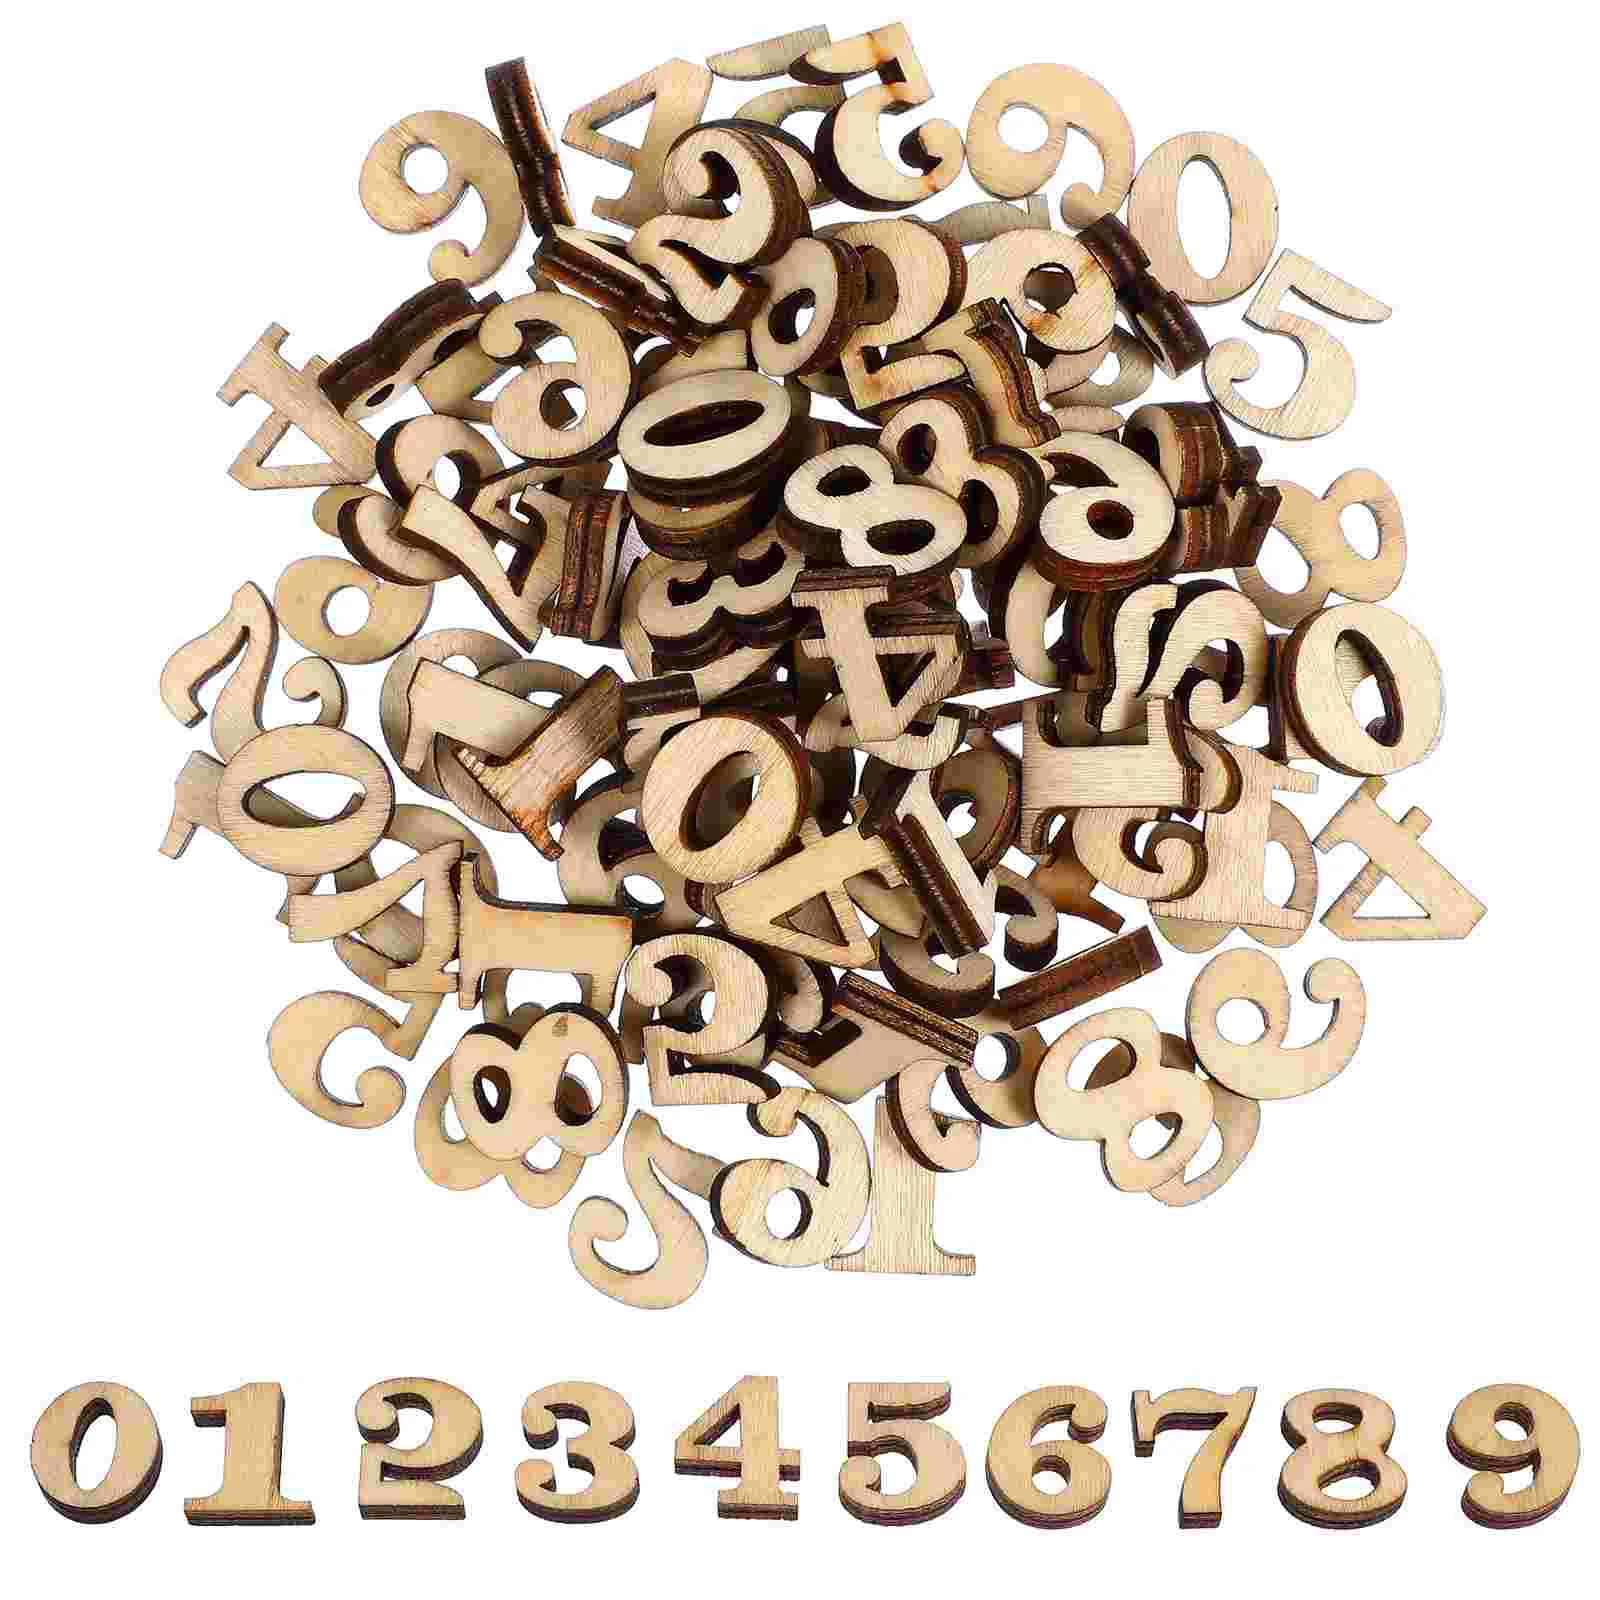 

Numbers Wooden Wood Diy Crafts Number Decoration Embellishments Letters Blank Handmade Alphabet Decors Discs Displays